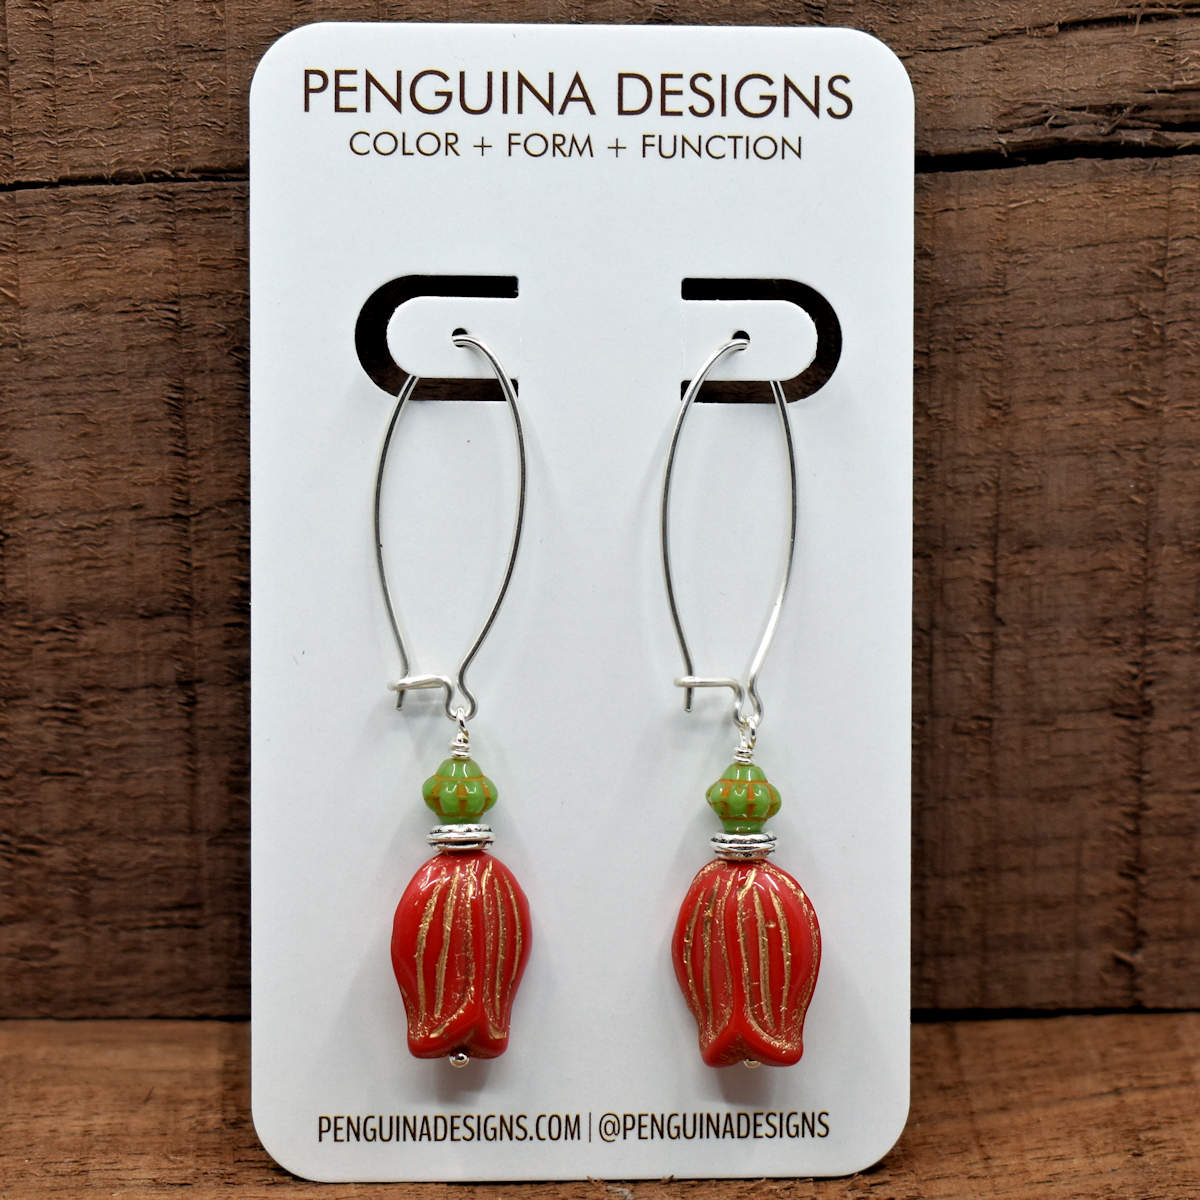 A pair of earrings on a white card rest against a wood background. The earrings have long silver oval wires that latch and at the bottom there are red upside down tulip beads with a green bead on top of them.